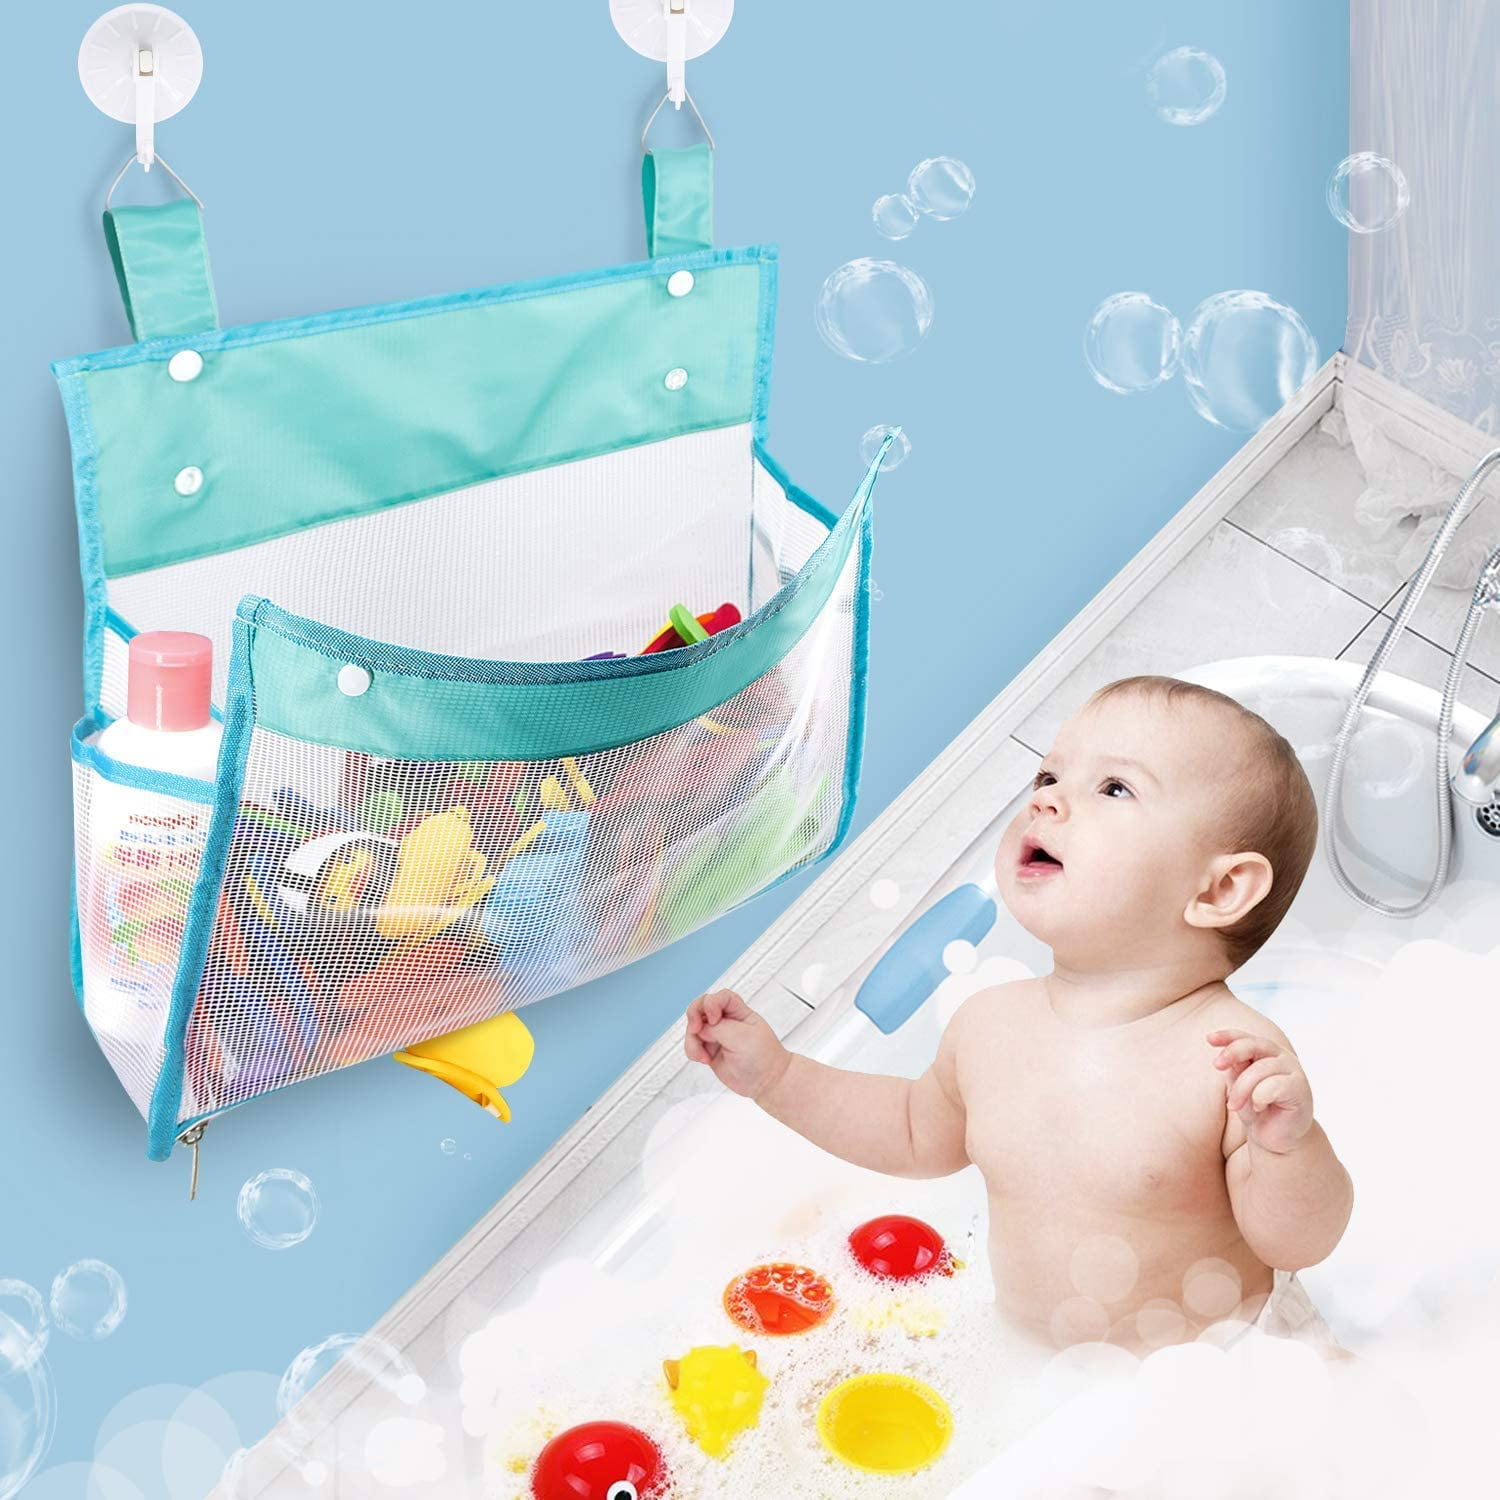 Toddlers and Adults with 3 Adhesive Strong Hooks Quick Dry Net Bathtub Toy Holder for Kids Hanging Bathroom Storage Bags Bath Toy Organizer Mesh Gray 